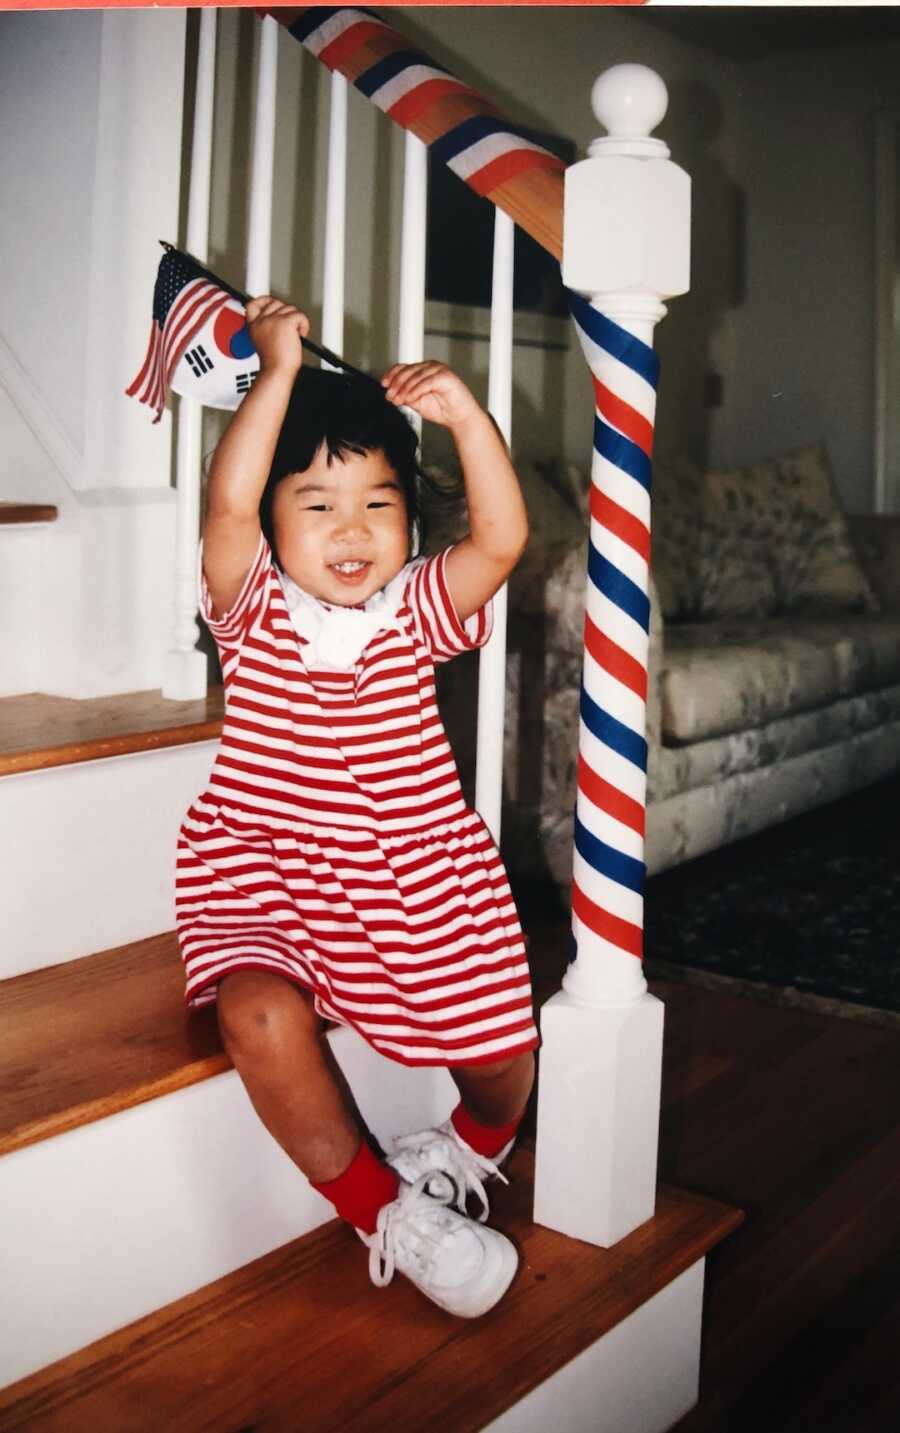 Korean adoptee sitting on steps with American and Korean flags